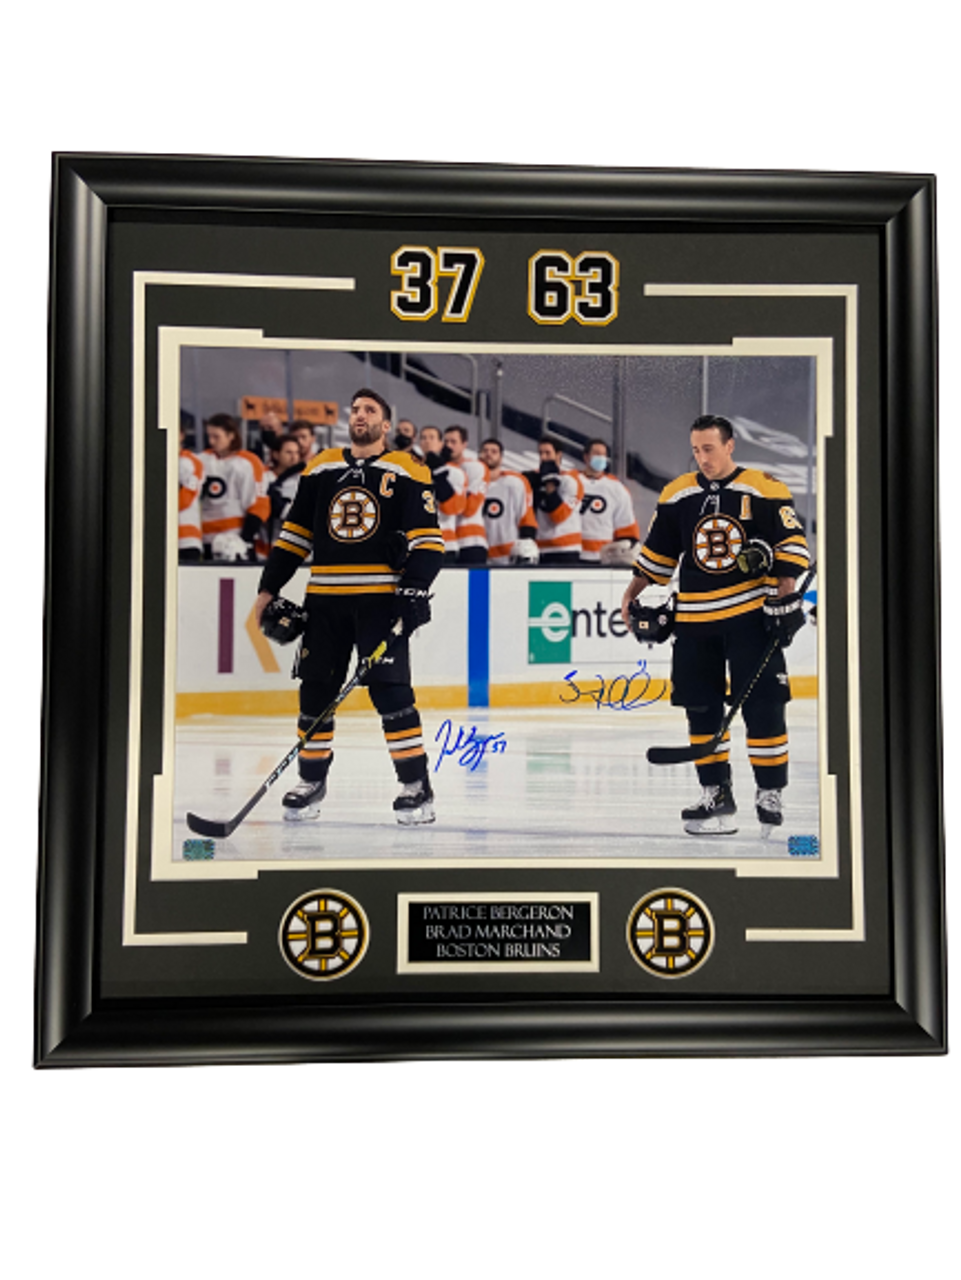 Boston Bruins 100th Anniversary Frame - 12 x 16 Banners to History | Sports Decor